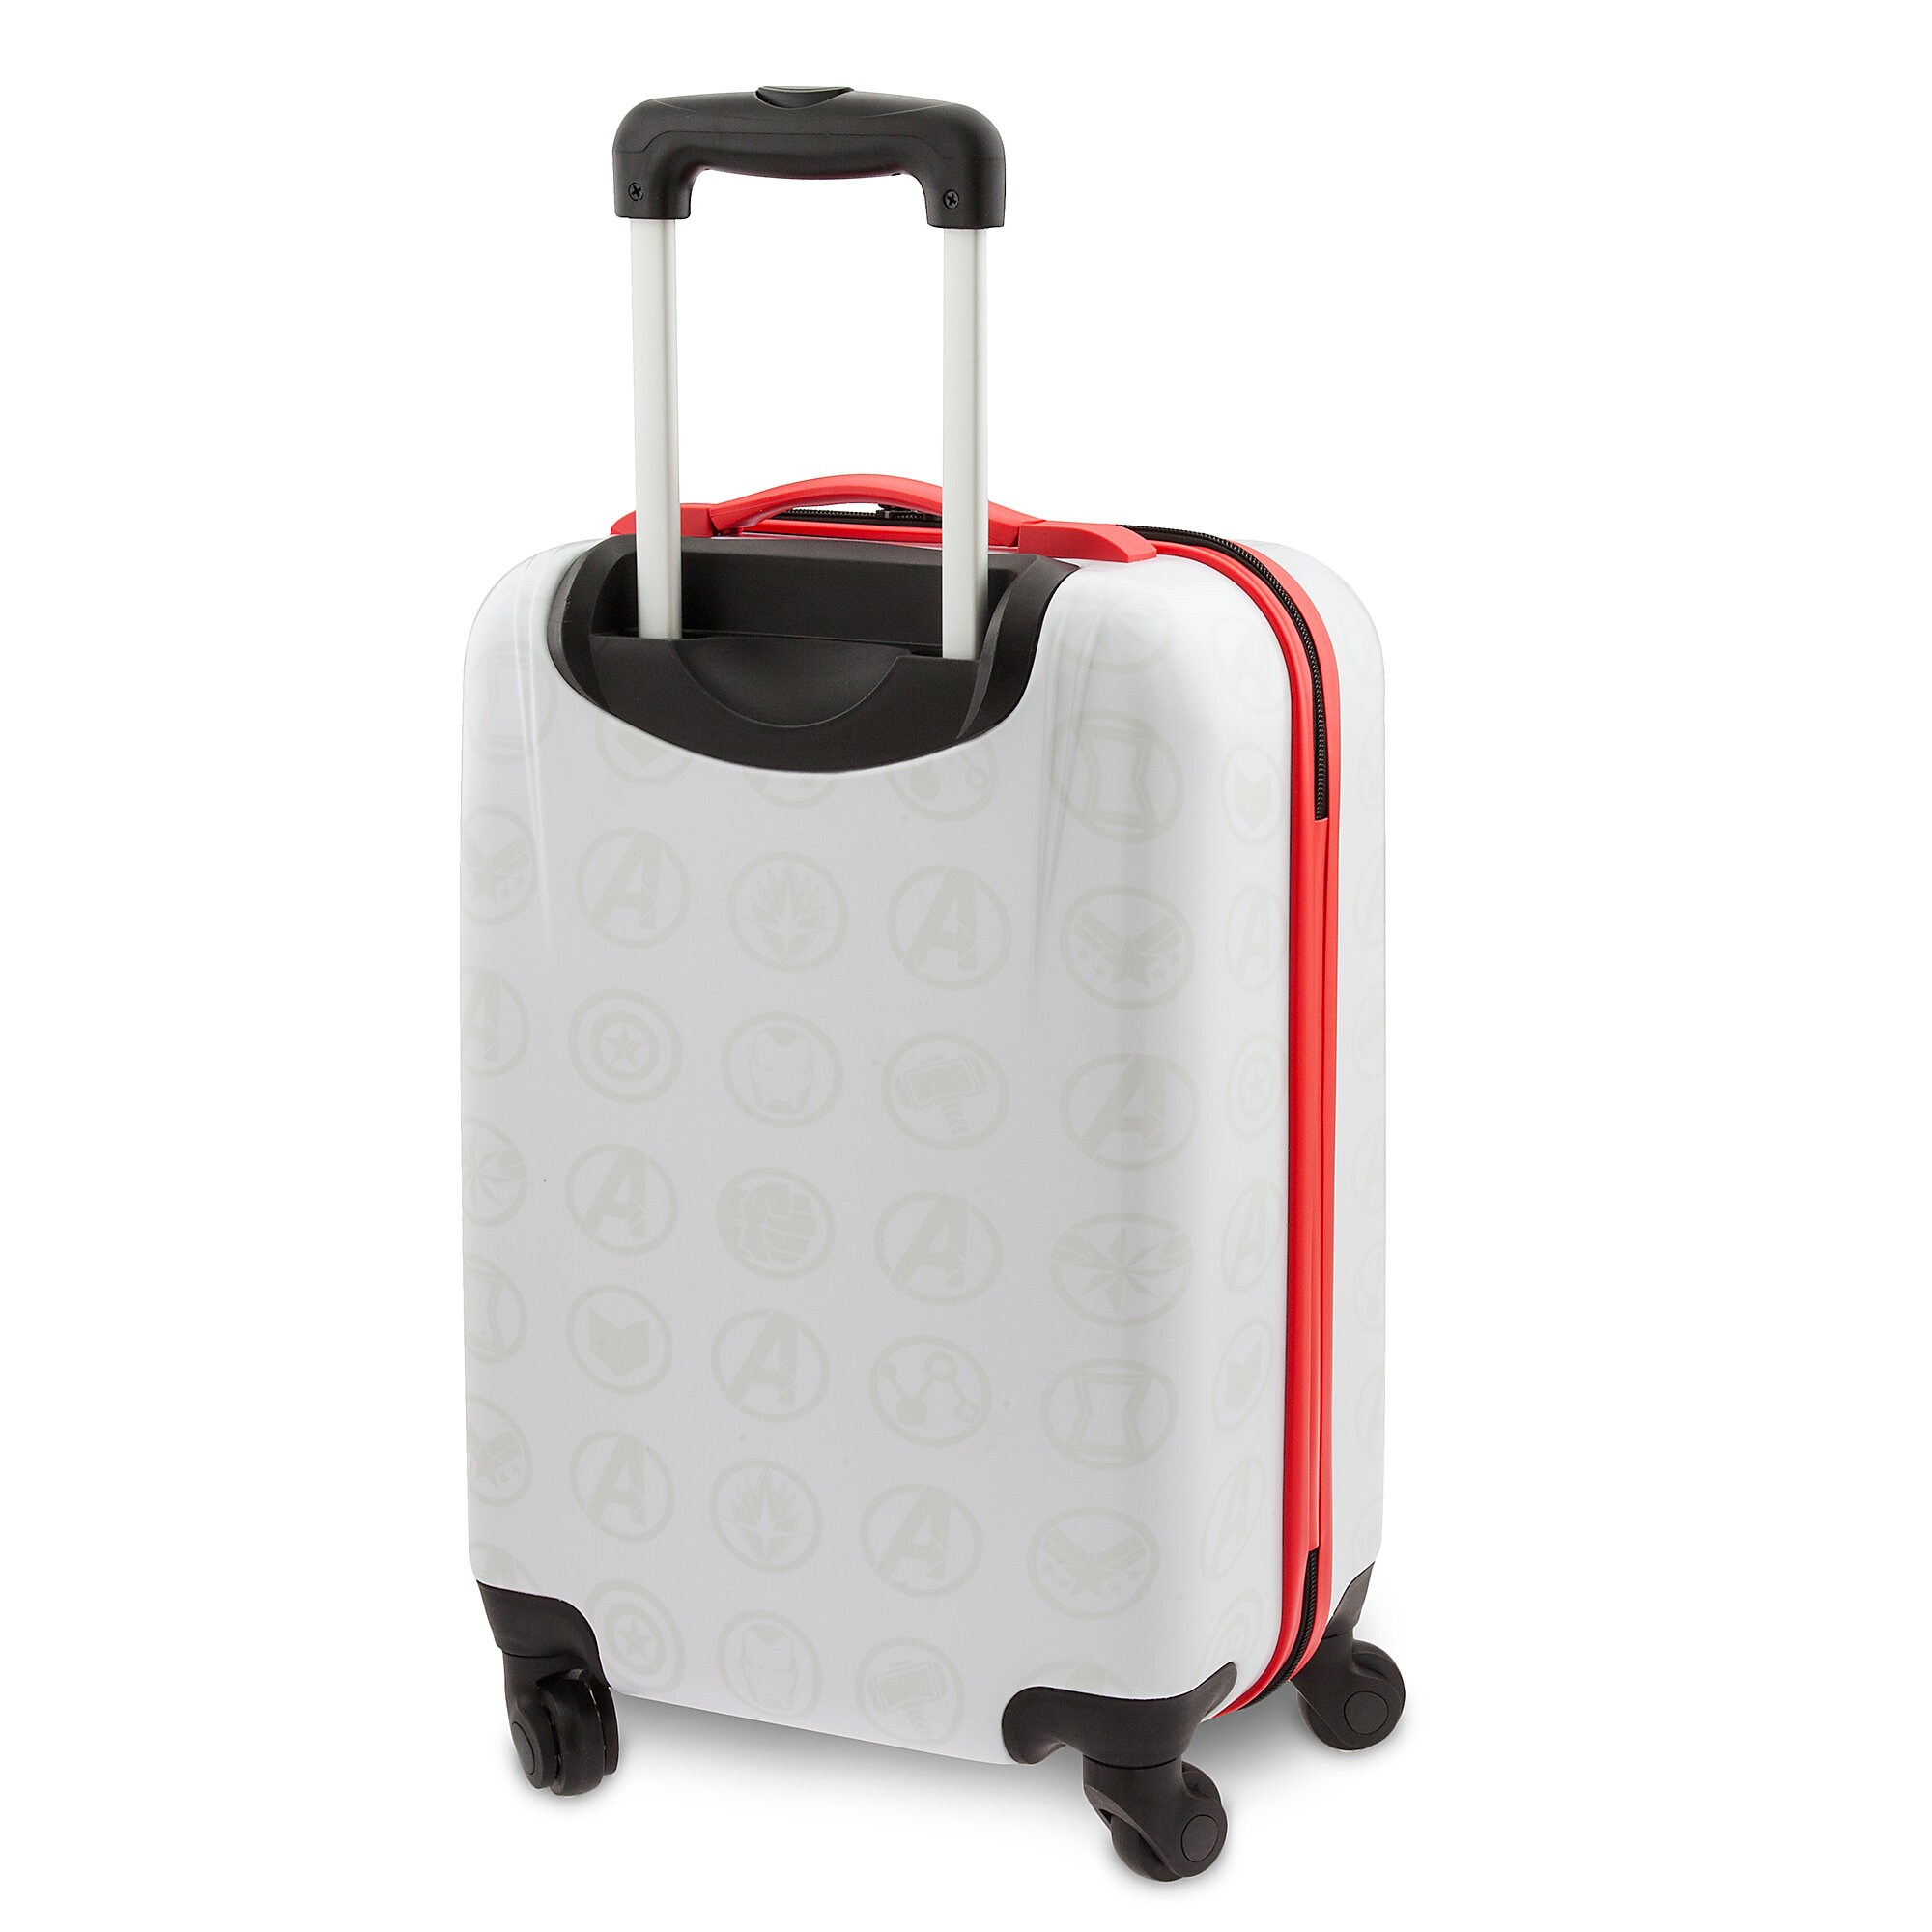 Marvel's Avengers Rolling Luggage - Small